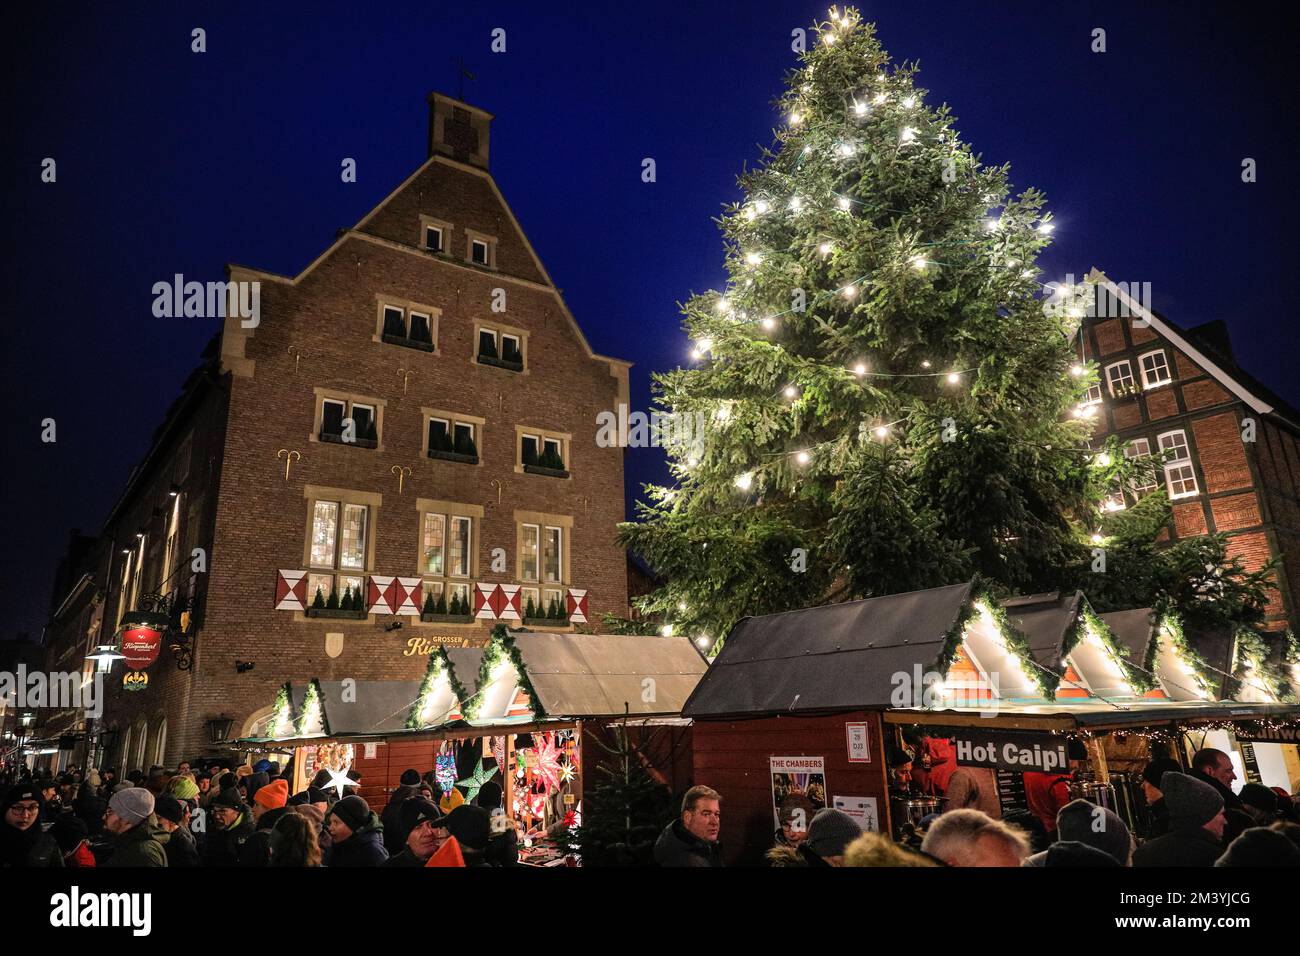 Münster, Germany. 17th Dec, 2022. The Kiepenkerl Christmas market, one of 5, gets busy. The historic city centre of Münster in Westfalia becomes quite crowded with festive shoppers and visitors to the town's 5 inter-connected Christmas Markets, drawing in visitors from nearby cities, coach tours, as well as many Dutch and other day trippers. Credit: Imageplotter/Alamy Live News Stock Photo